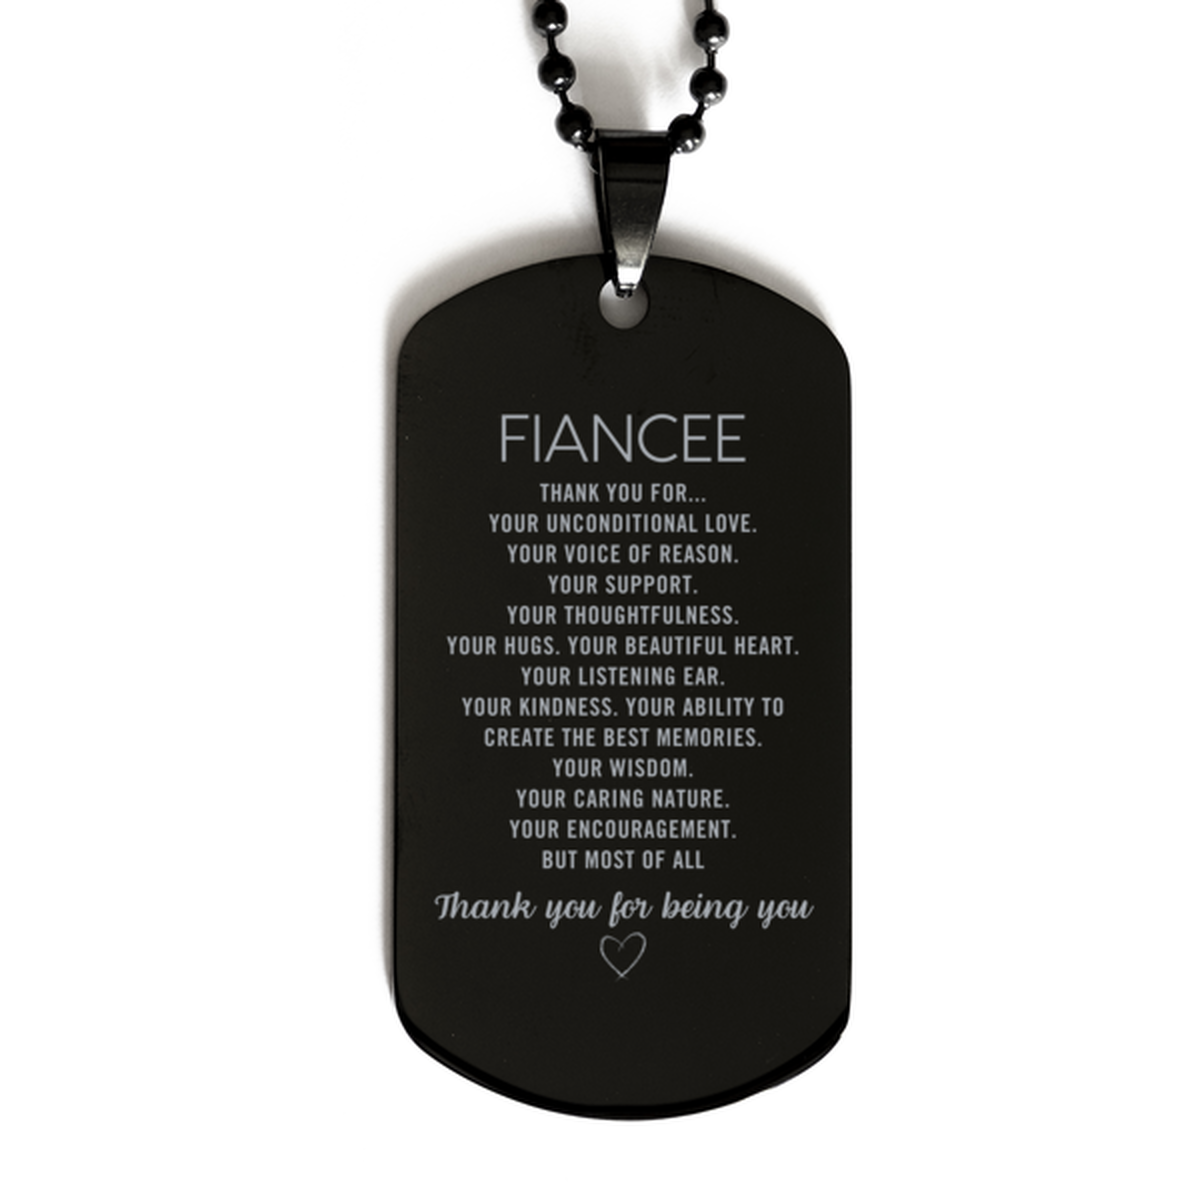 Fiancee Black Dog Tag Custom, Engraved Gifts For Fiancee Christmas Graduation Birthday Gifts for Men Women Fiancee Thank you for Your unconditional love